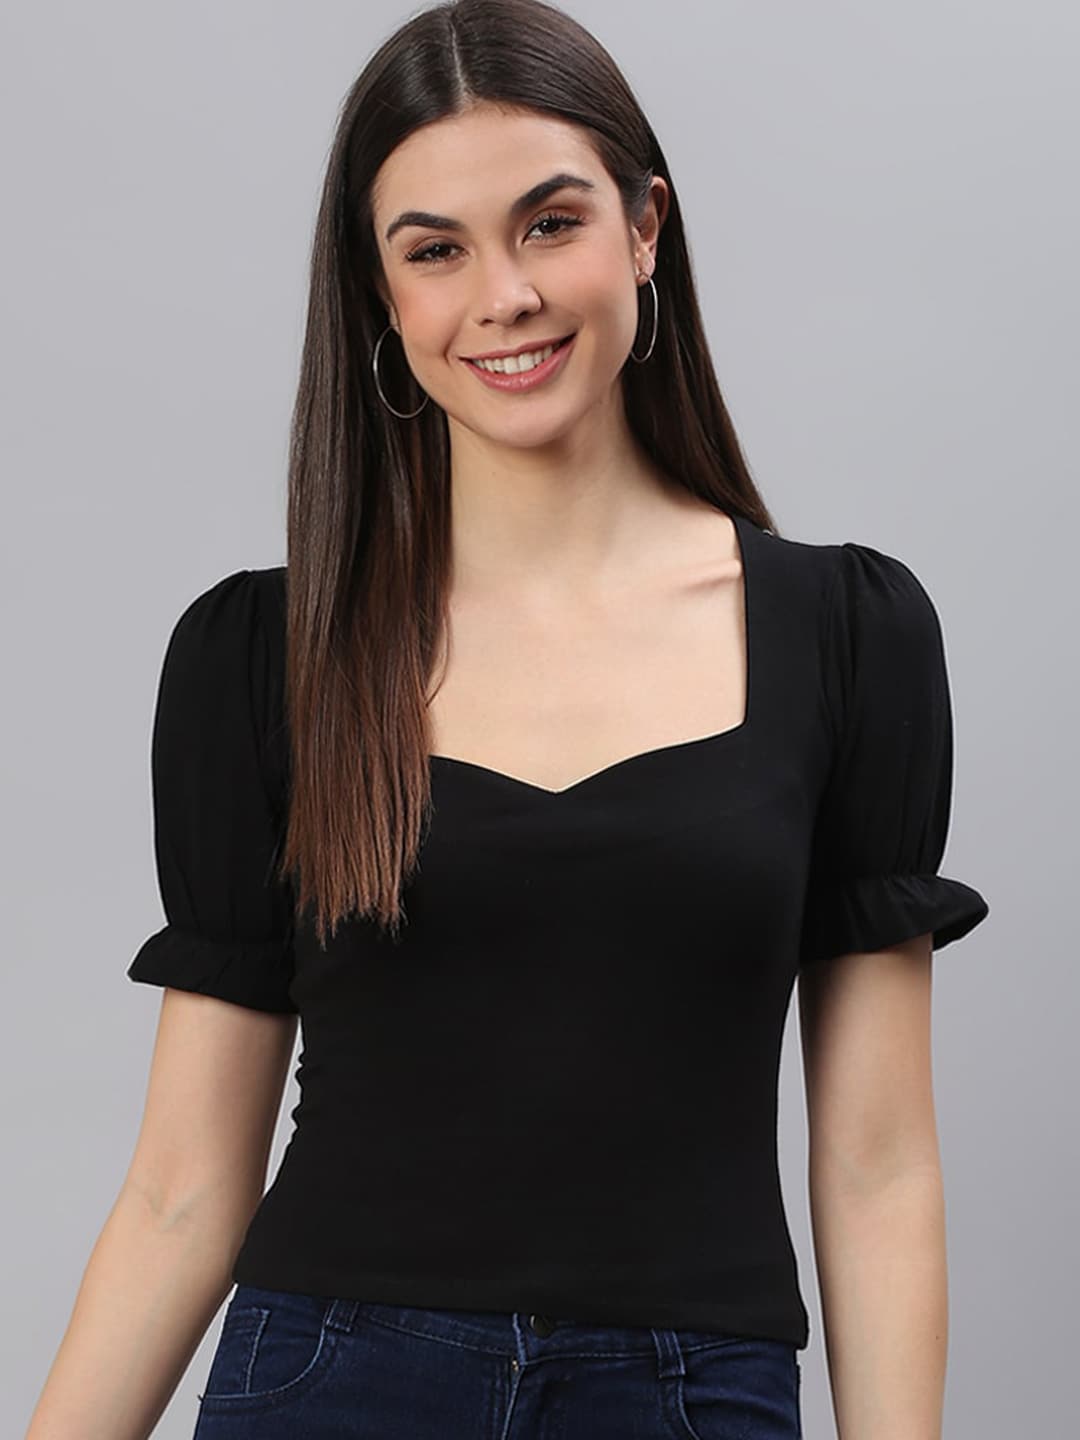 Cation Black Sweetheart Neck Fitted Top Price in India